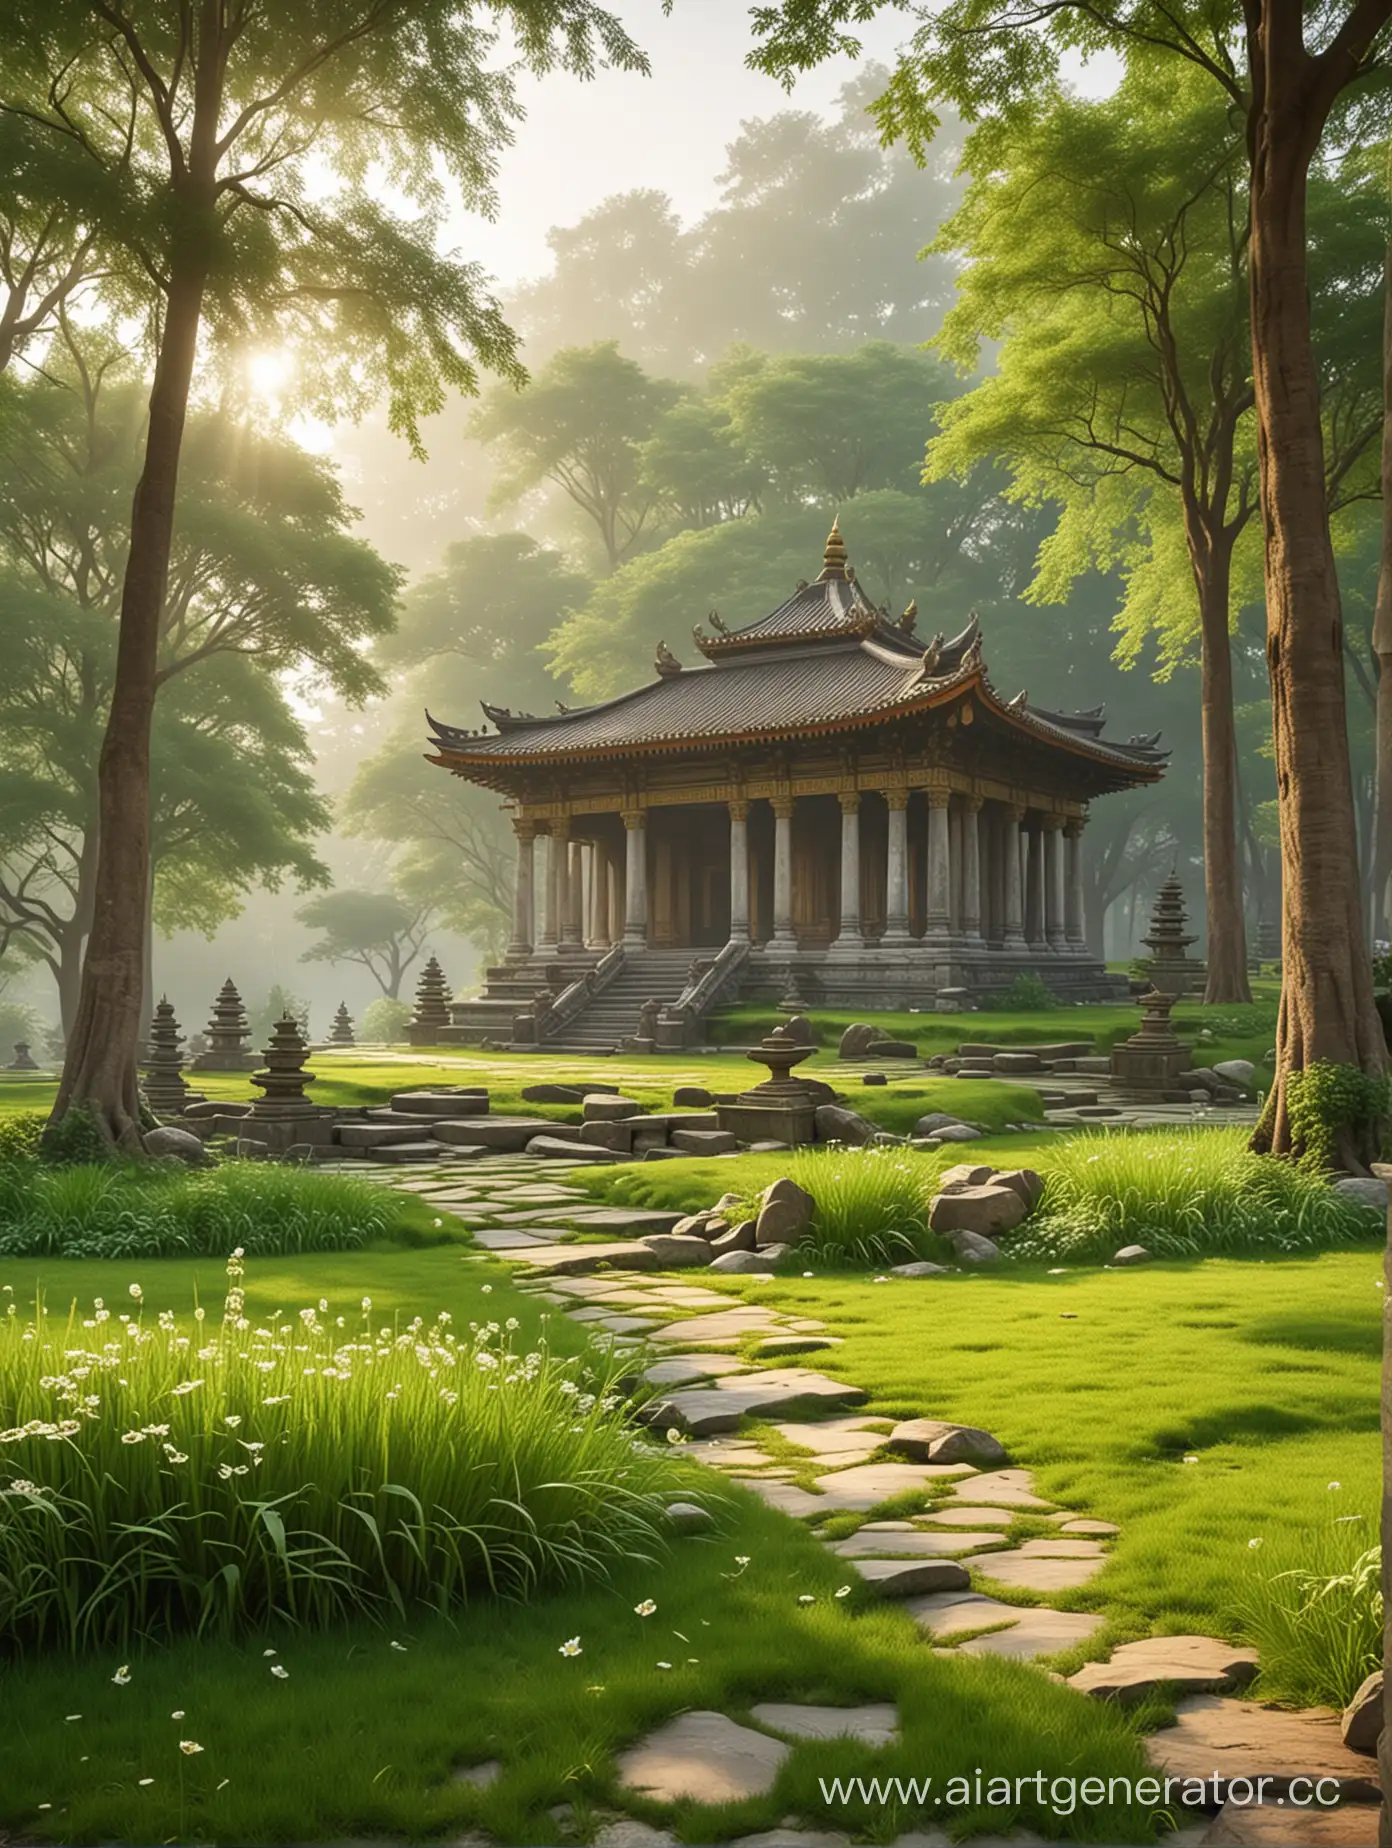 Luxurious-Temple-Surrounded-by-Lush-Greenery-on-a-Serene-Spring-Morning